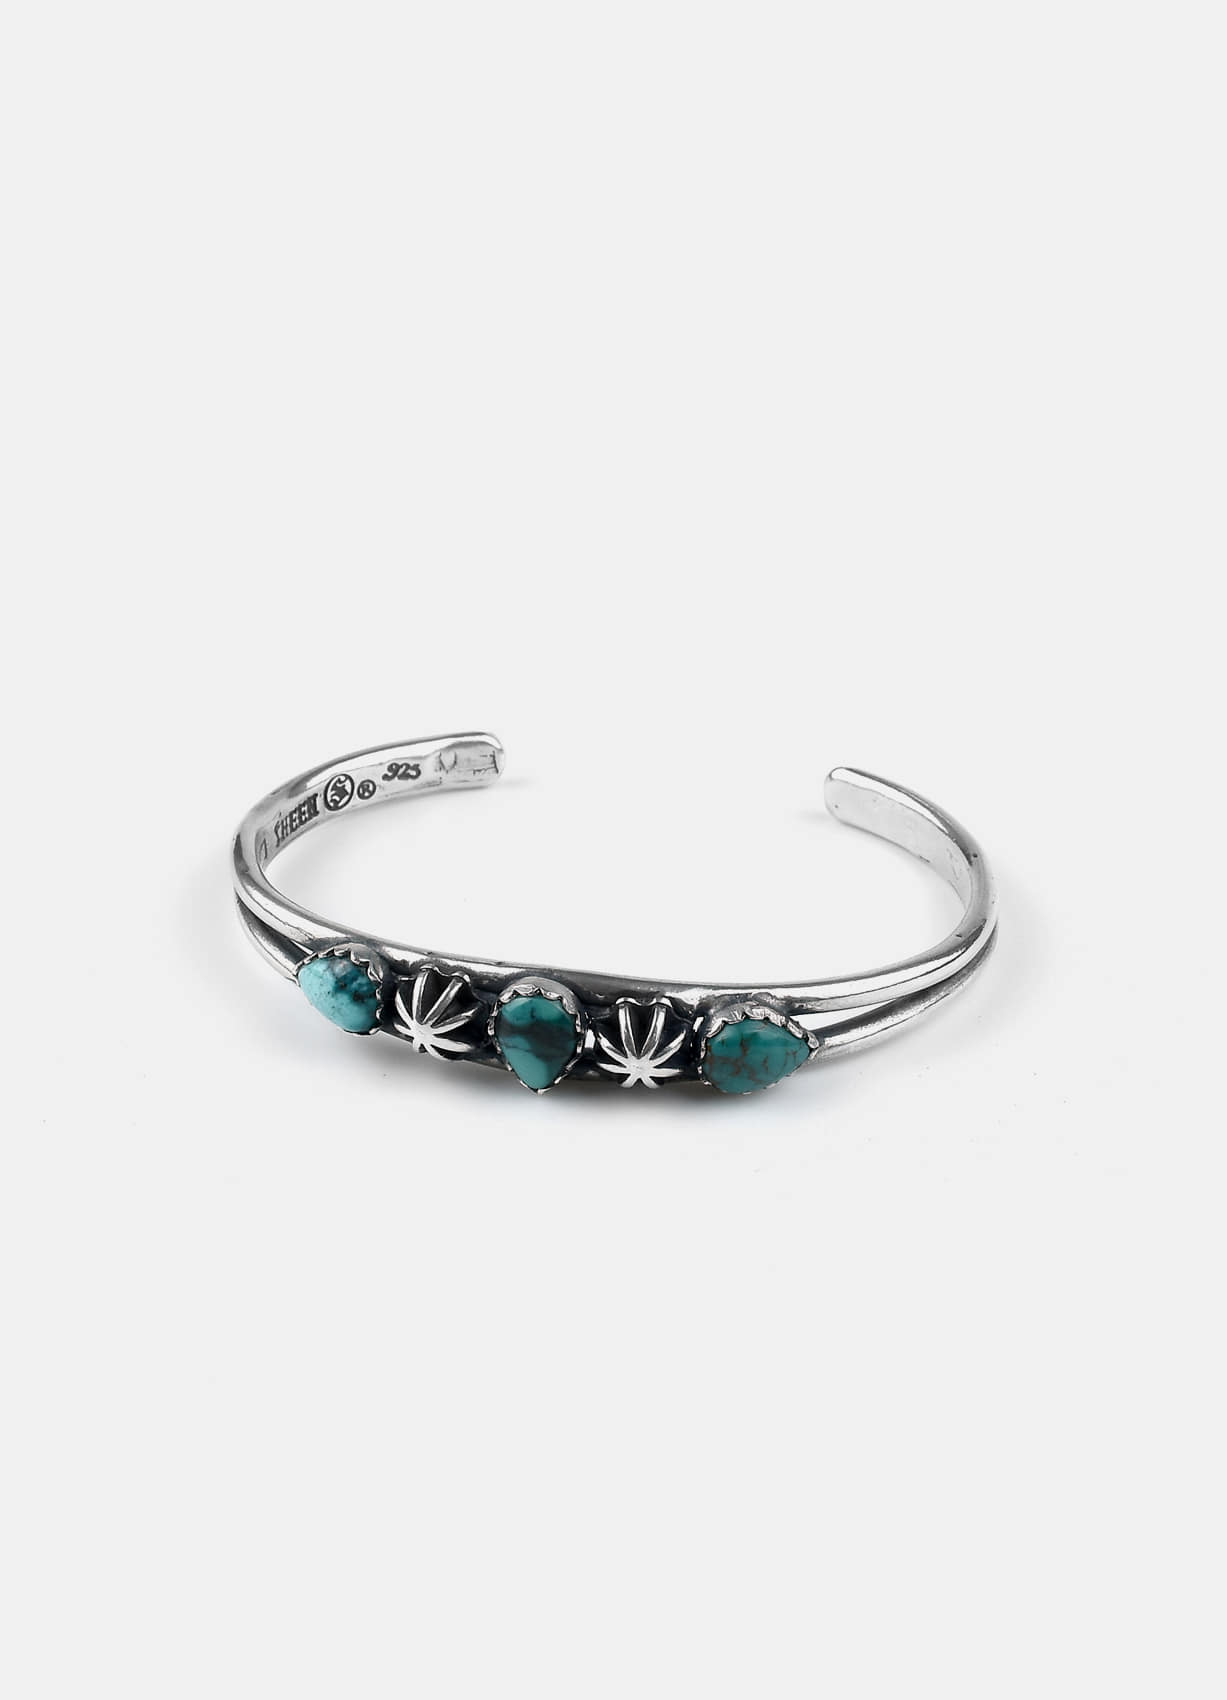 3 Turquoise Silver Bangle